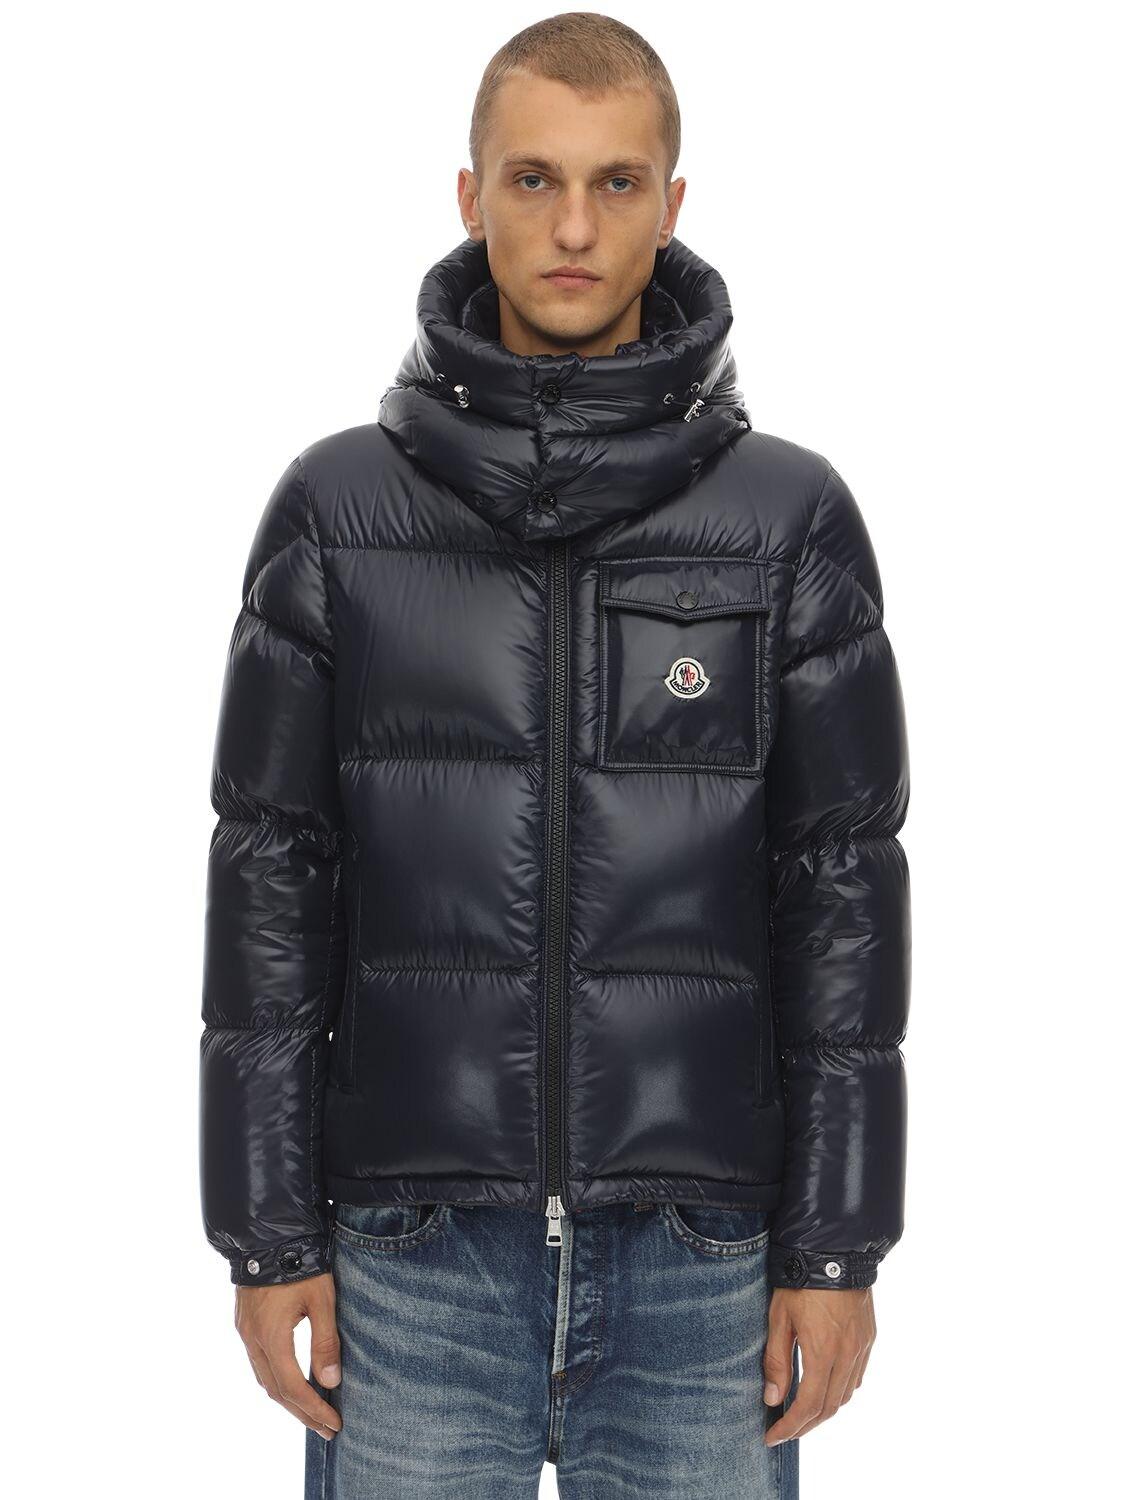 Moncler Synthetic Montbeliard Down Jacket in Navy (Blue) for Men - Lyst